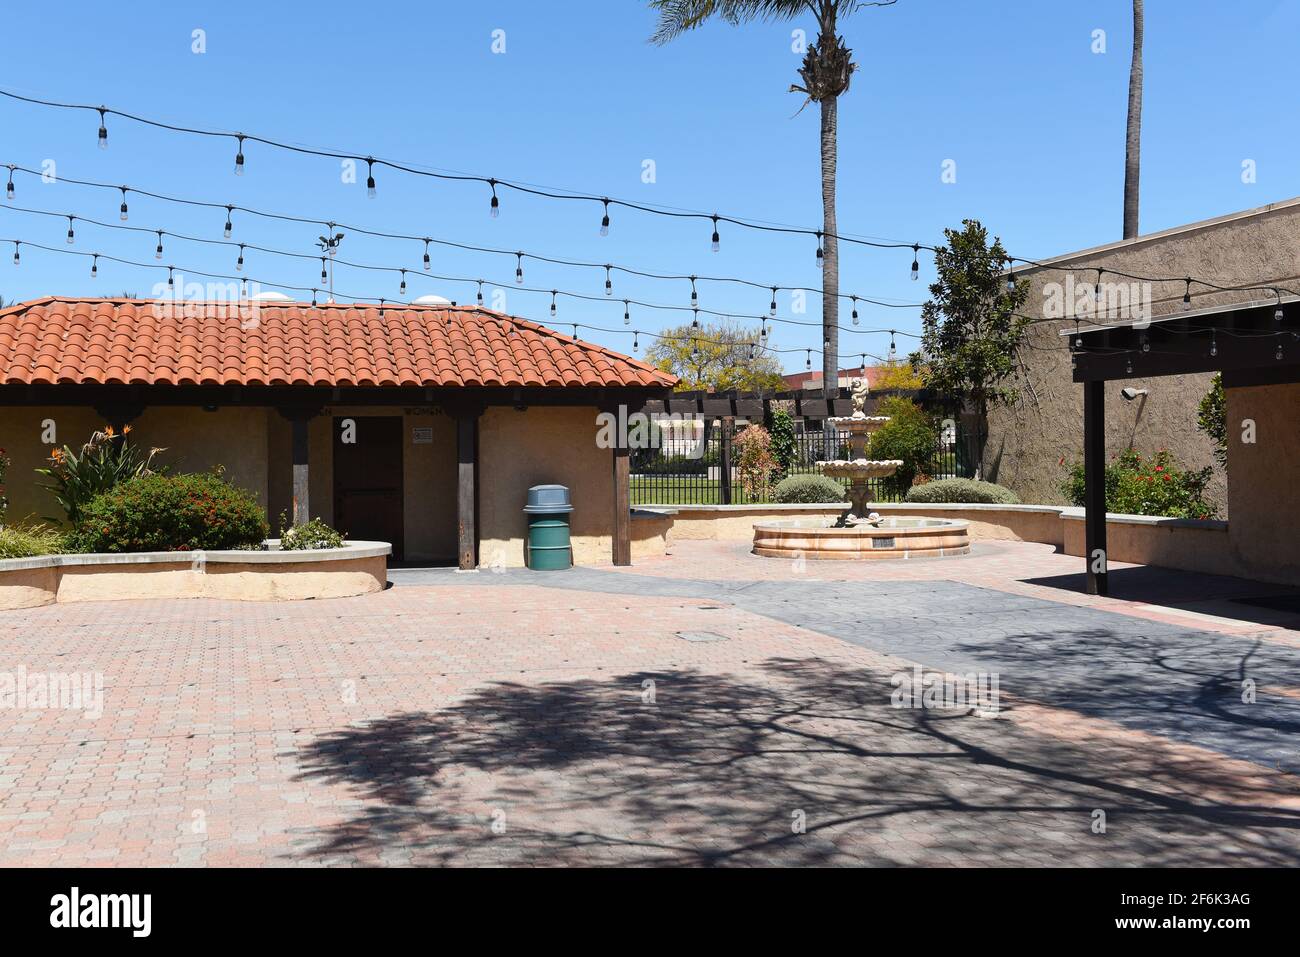 GARDEN GROVE, CALIFORNIA - 31 MAR 2021: The Courtyard Center on the Village Green is a Performance and Event Venue. Stock Photo